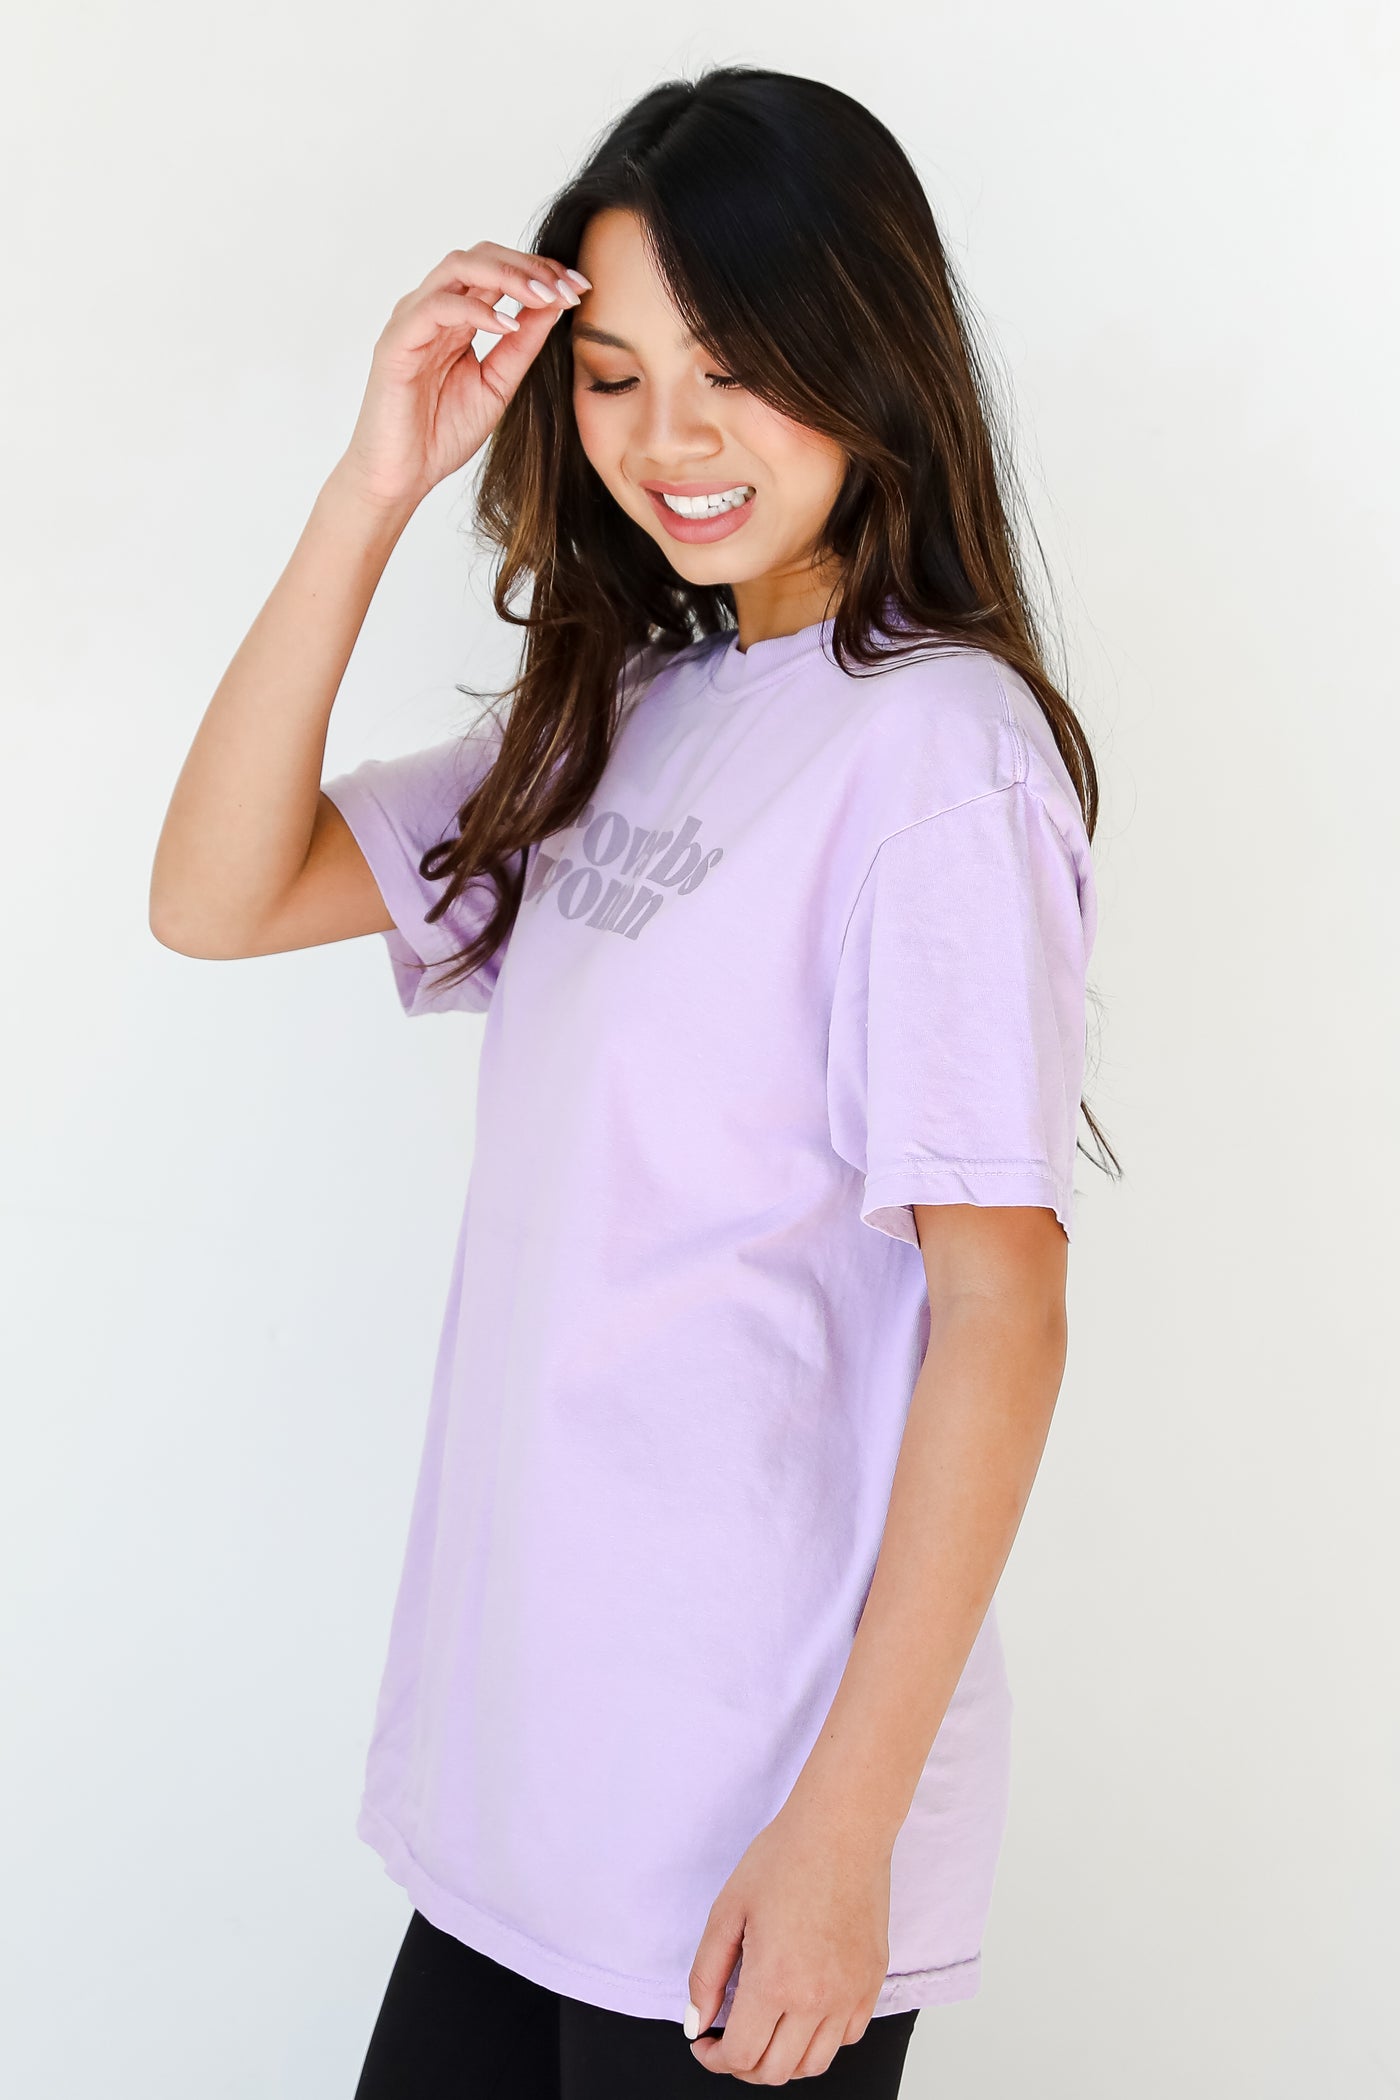 Lavender Proverbs Woman Tee side view